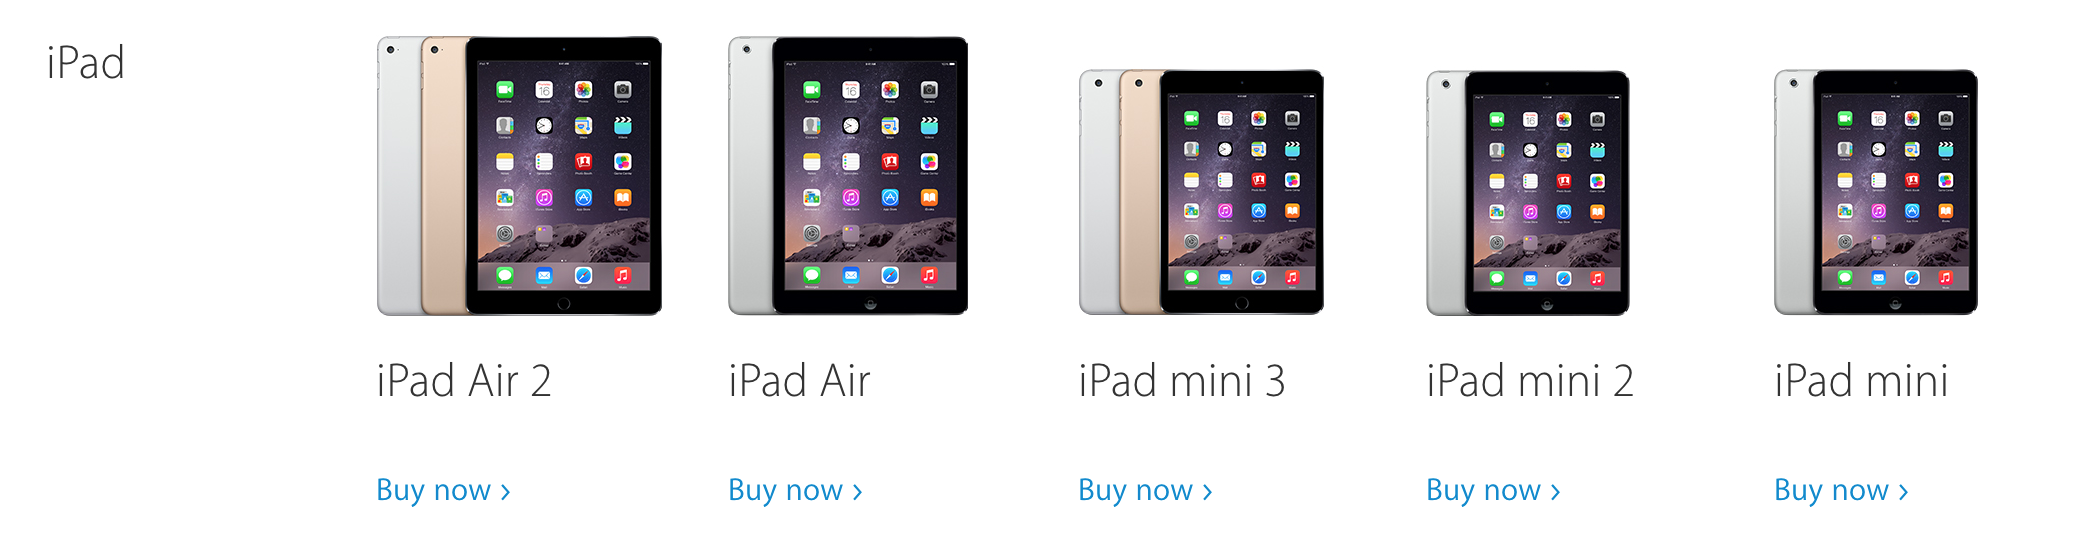 Apple quietly pulls original iPad mini from web site and Apple Store ...